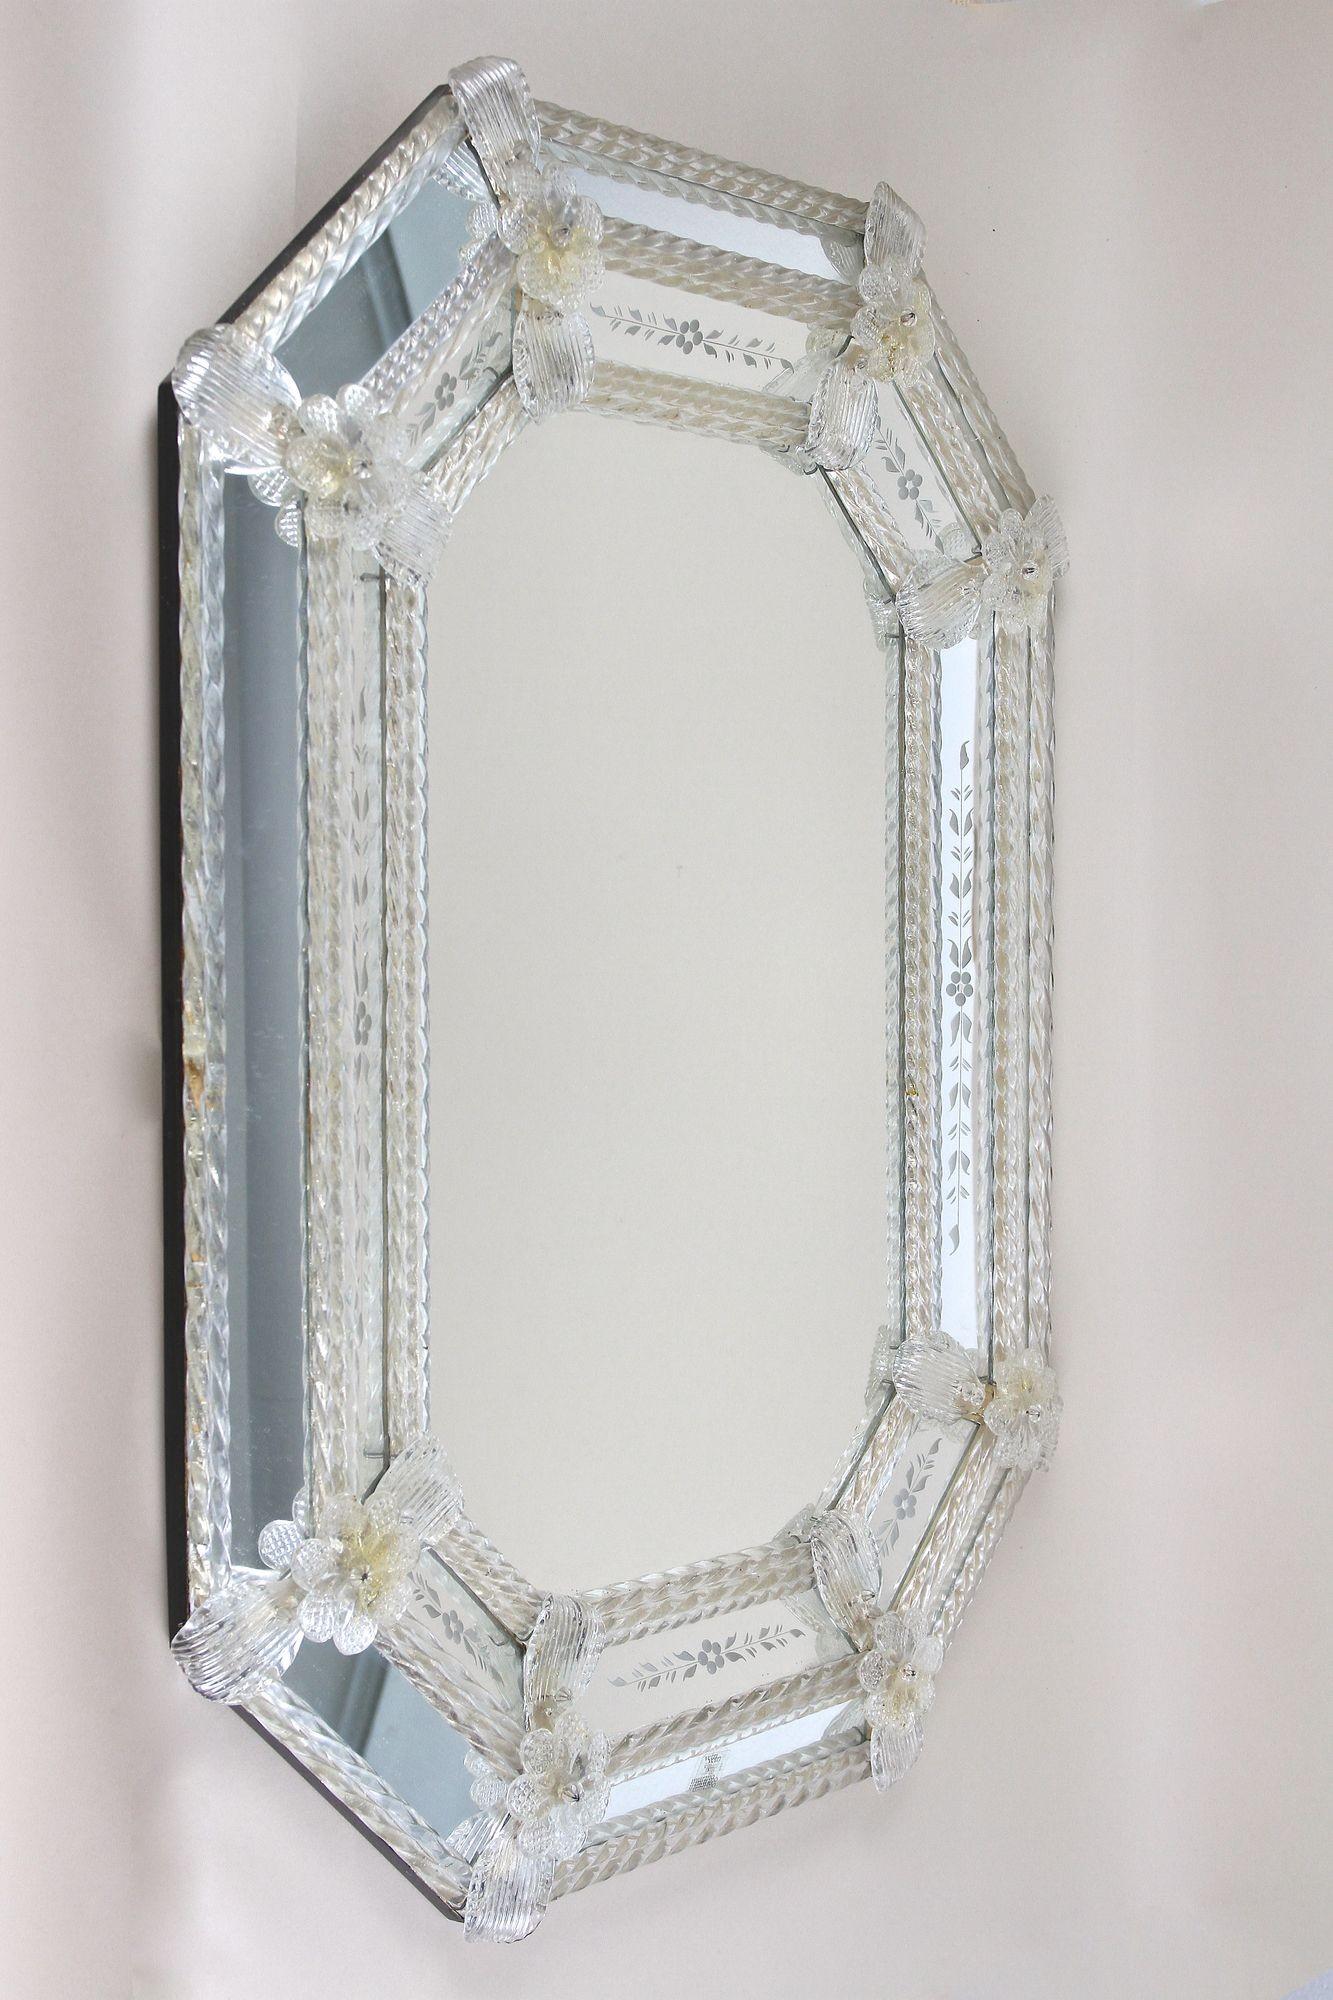 Absolute stunning late mid century Murano glass mirror from the famous workshops of the little island in Venice/ Italy. This extraordinary piece of an octagonal murano wall mirror impresses with amazing details wherever you look. Artfully